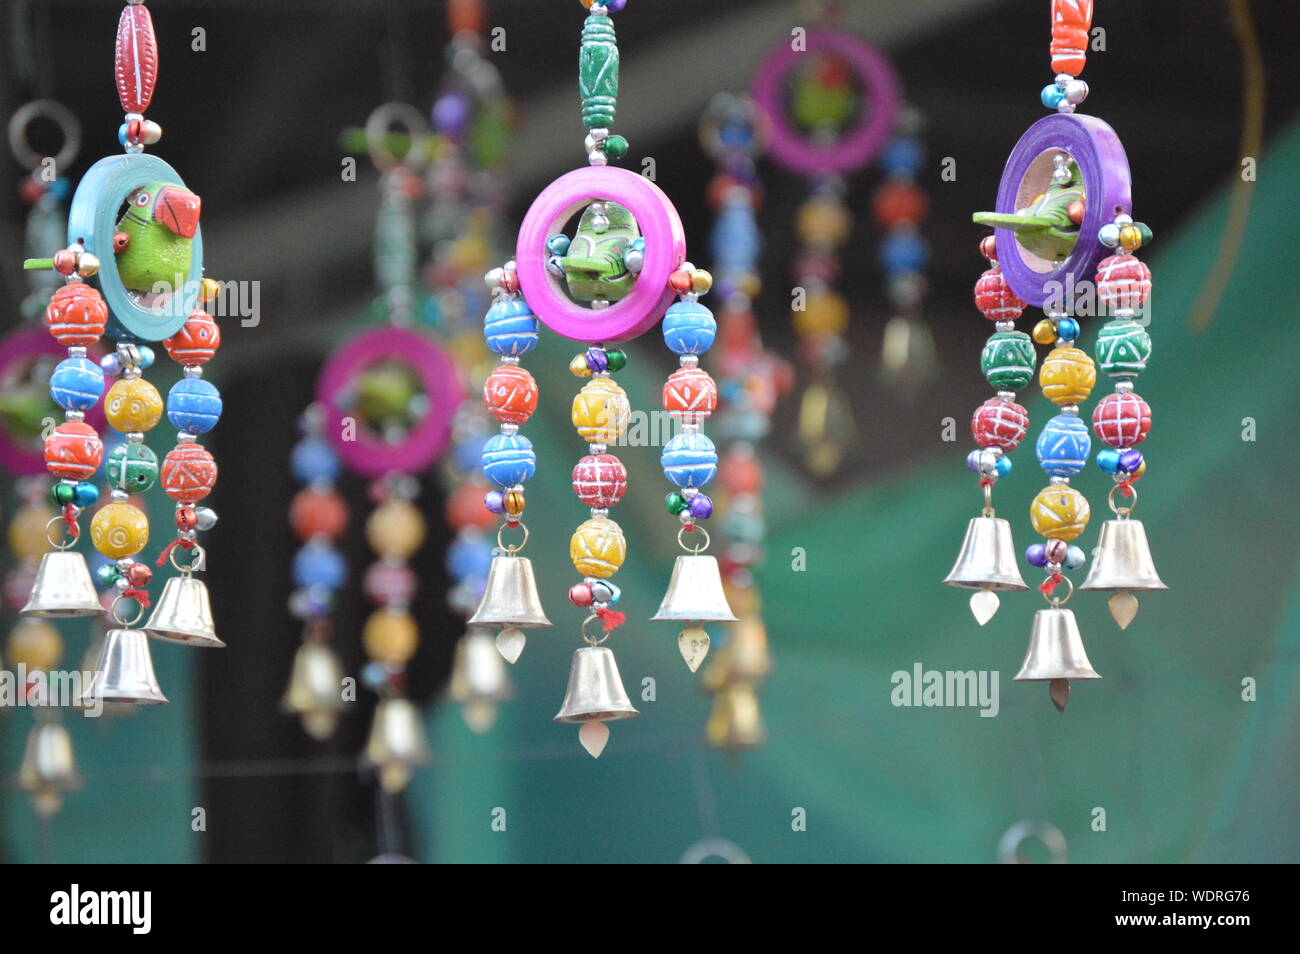 Close-up Of Colorful Hanging Decoration Stock Photo